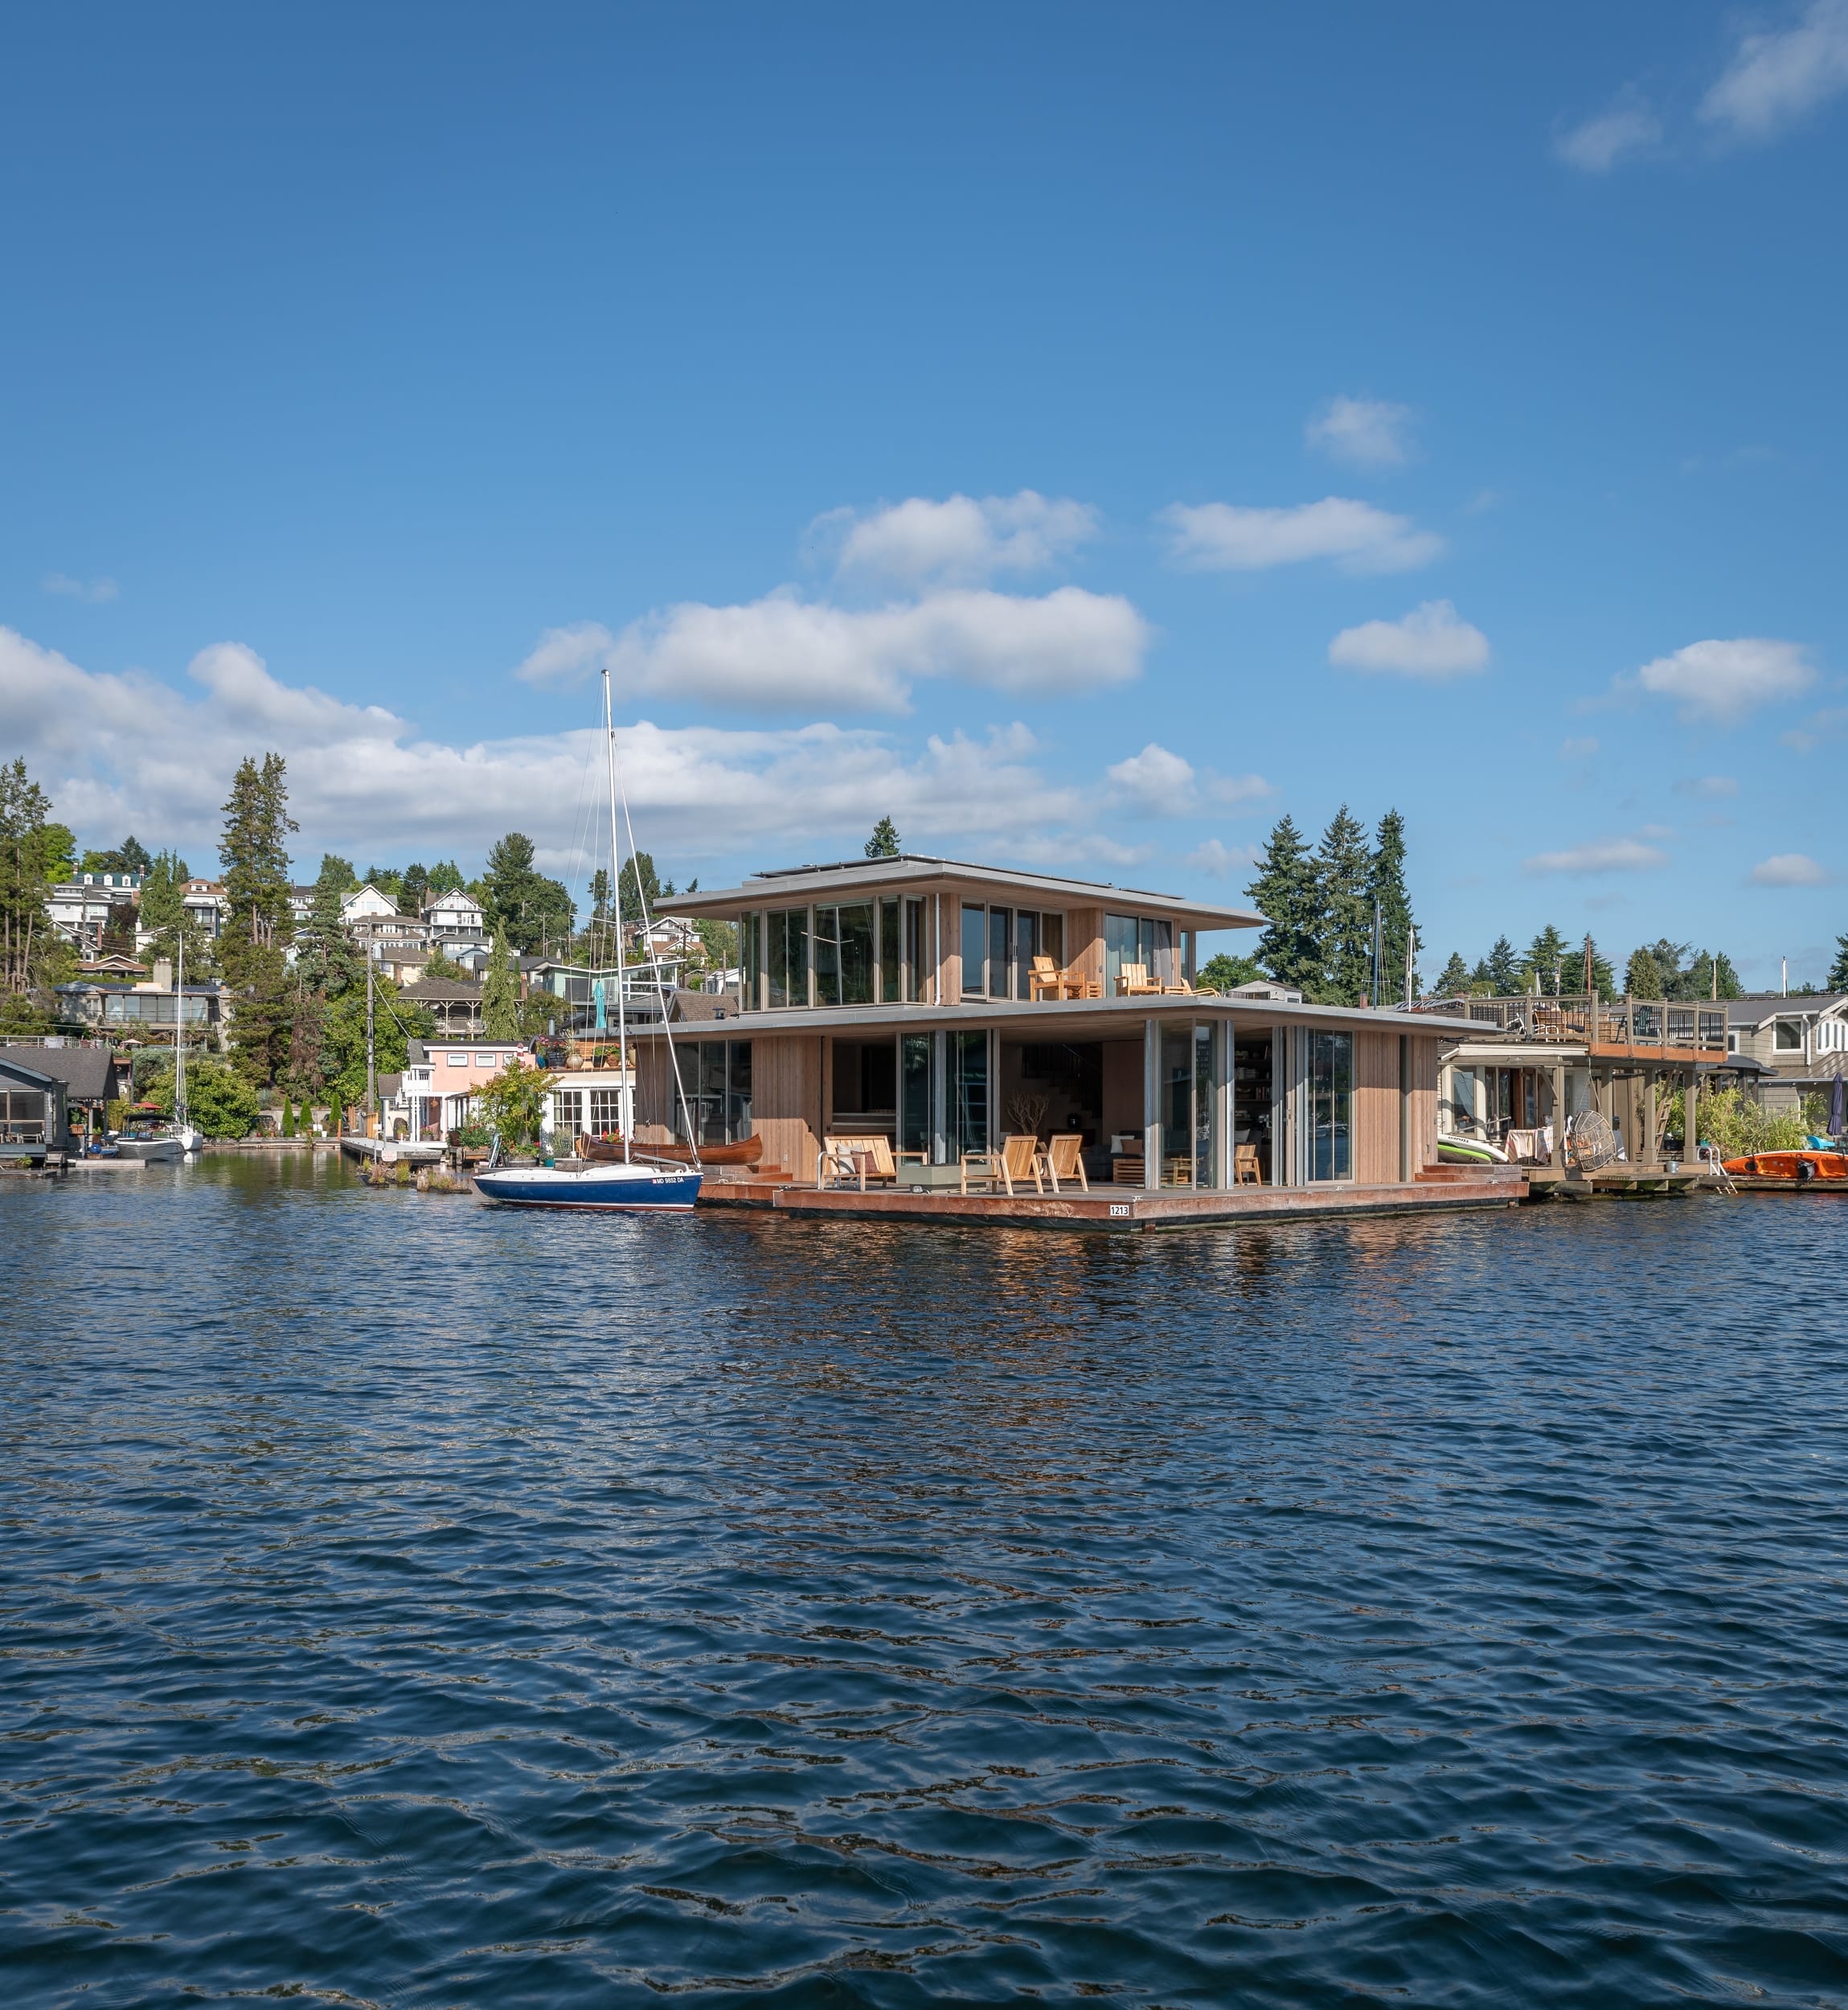 The carpenter built a floating home in the water.